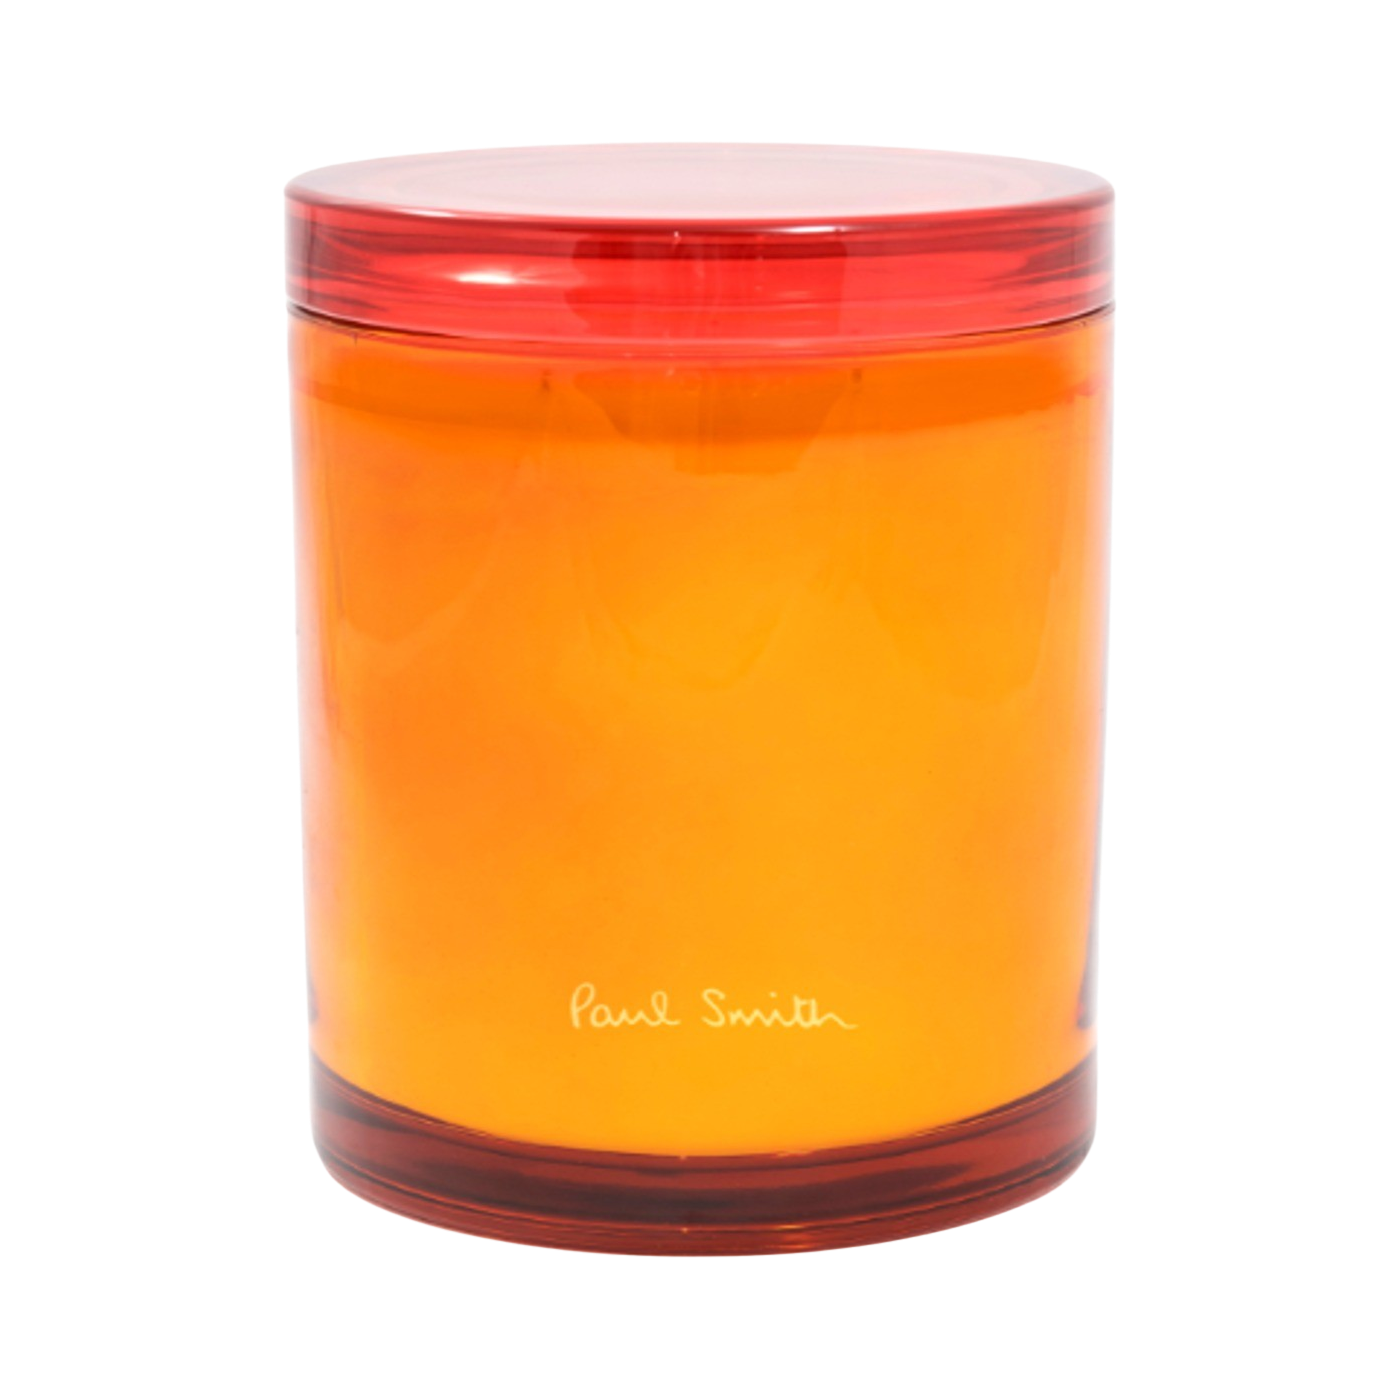 88574 Paul Smith BOOKWORM Candle 1000g